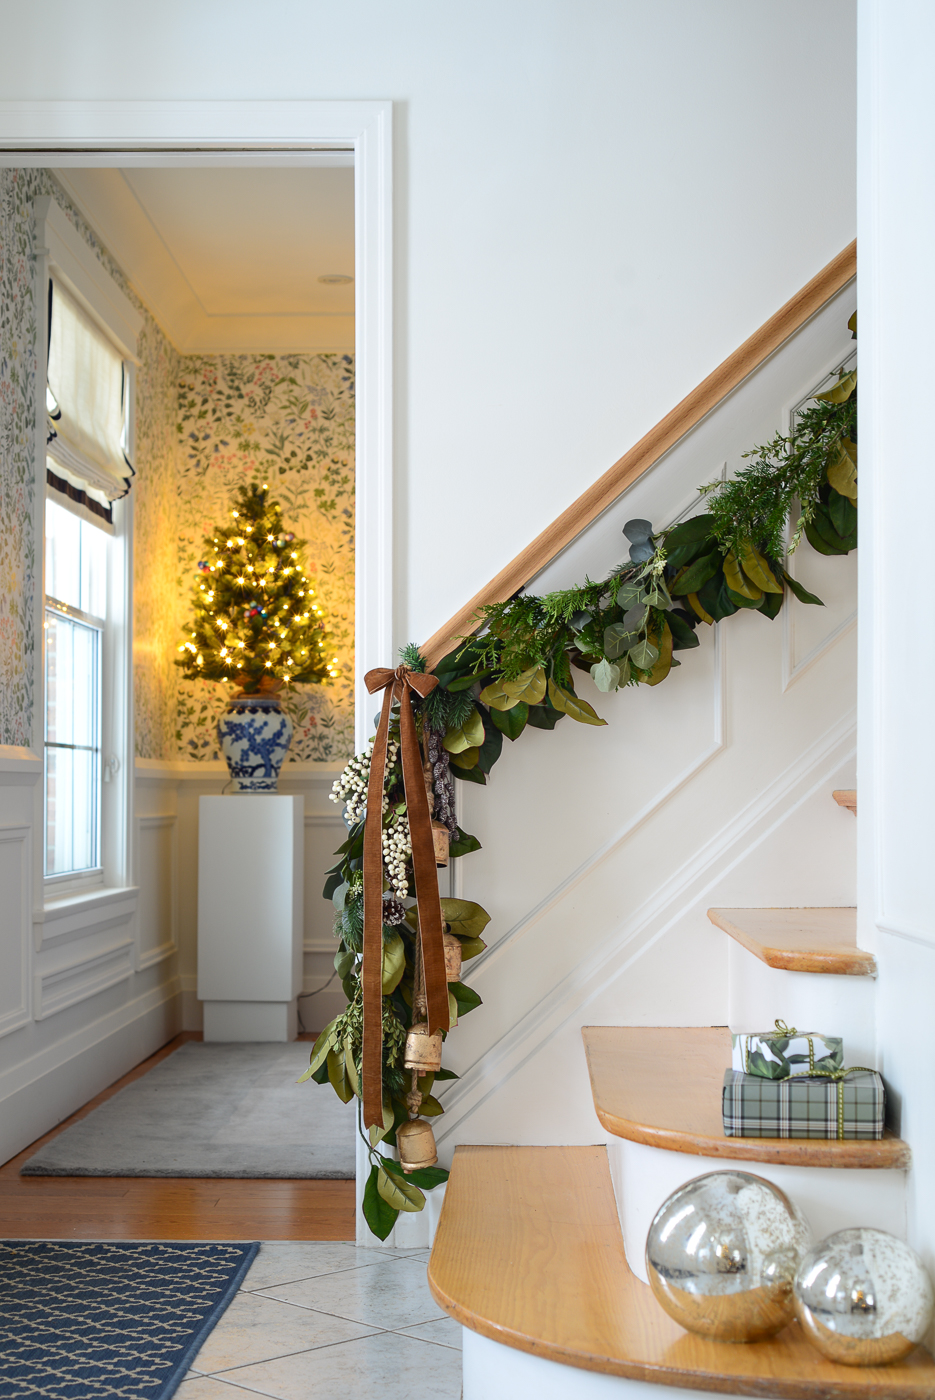 indoor Christmas decoration ideas, Christmas decorating ideas indoor, stairway garland, Christmas garland on stairs